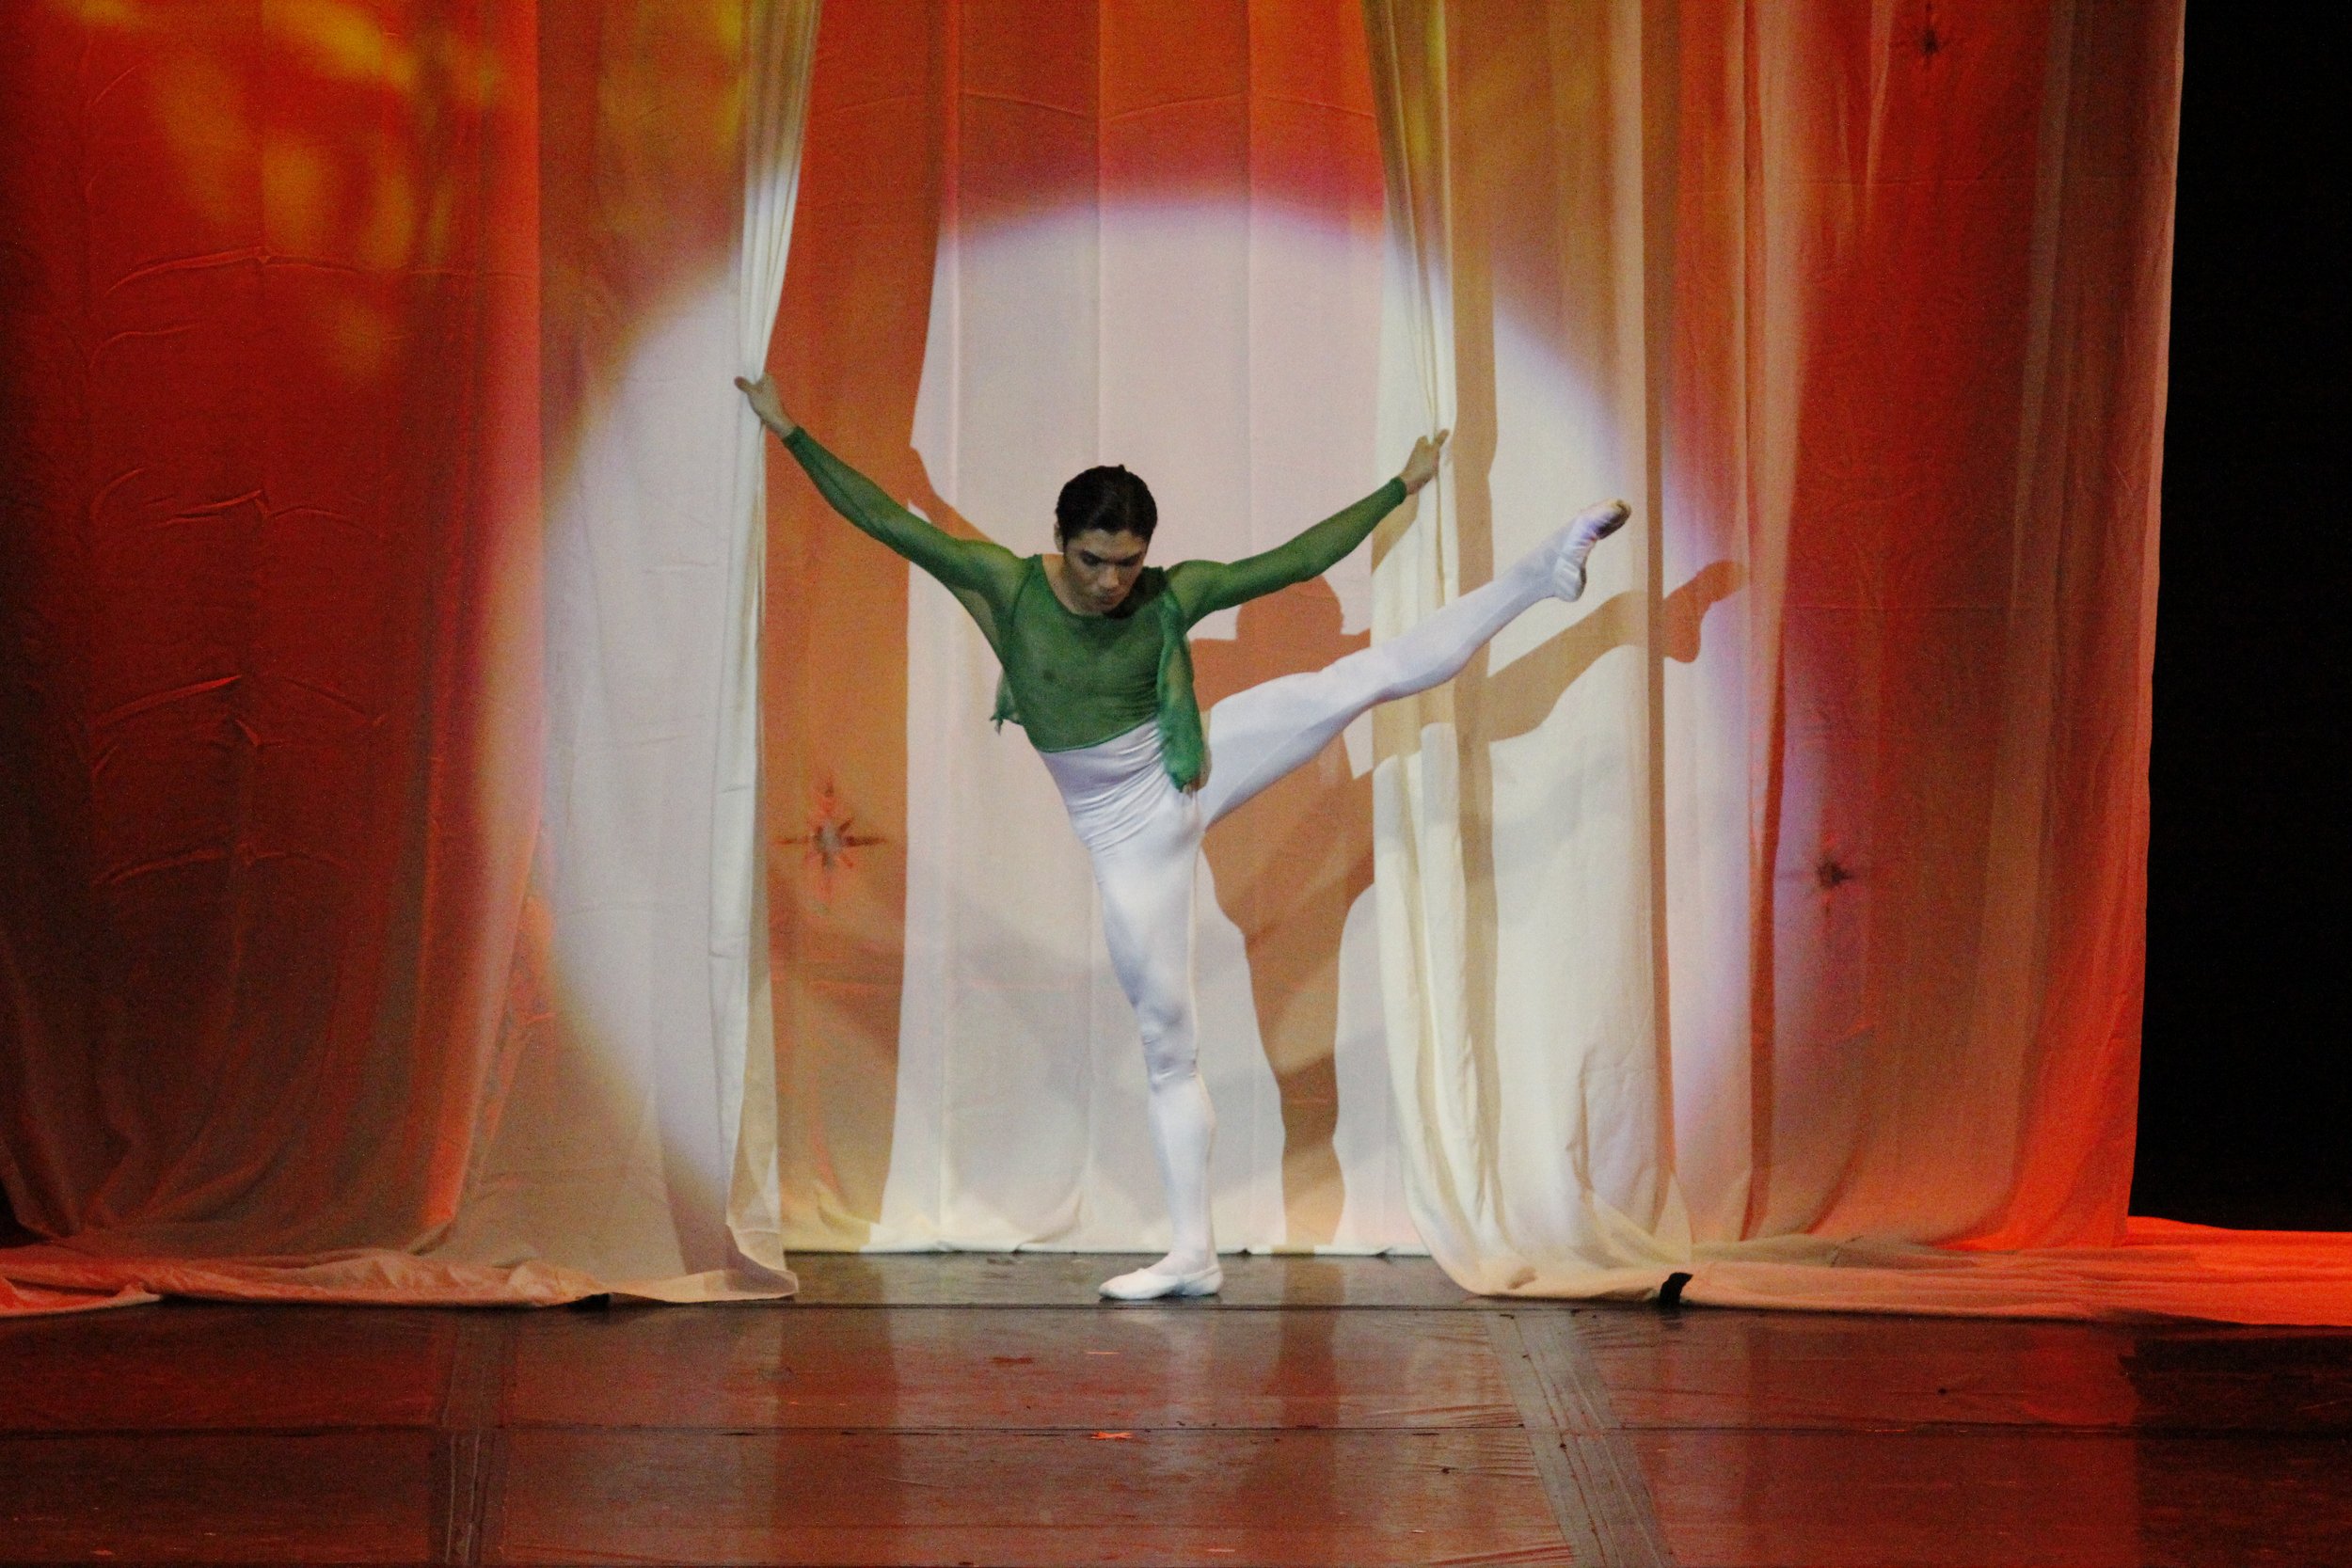    In a dark green transparent top, Romeo Peralta represents one-third of the trio (along with Lisa Macuja-Elizalde and Rudy De Dios) that brought to life Manuel Molina’s choreography and concept titled  The Light (Faith for salvation).  Set to Celin